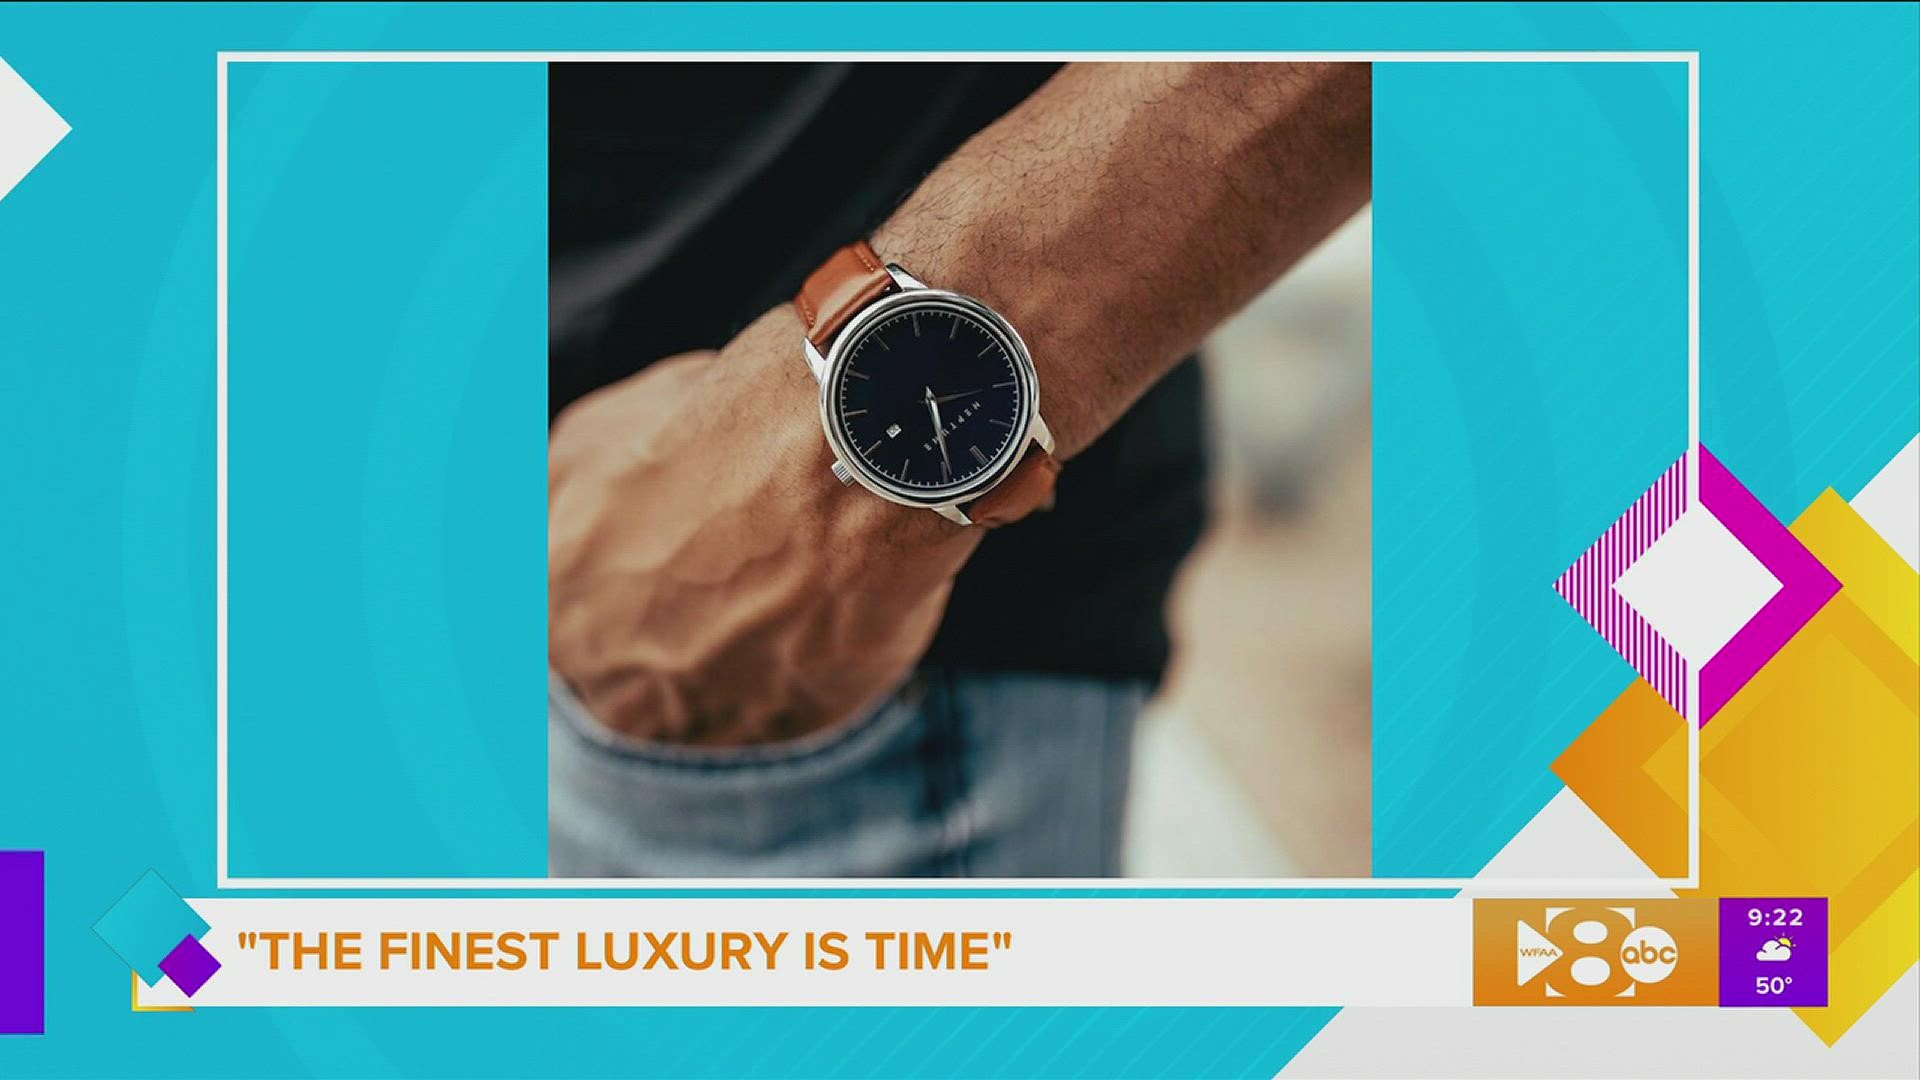 Neptune Watch Company Founder Christian Hollie shares his story and how he gives back.